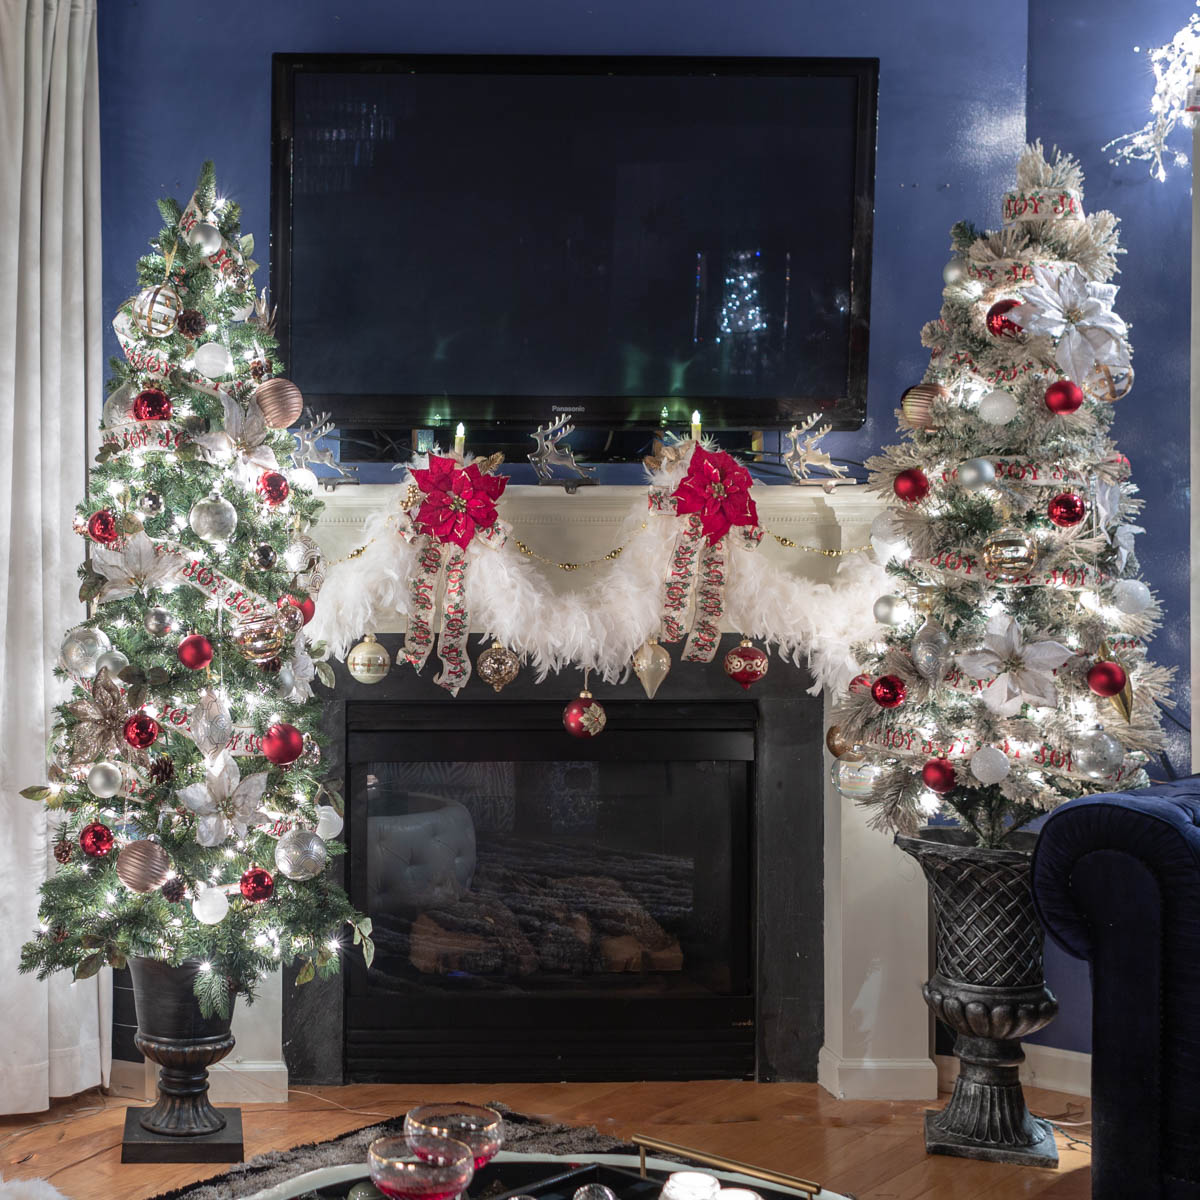 How To Decorate A TV Stand For Christmas